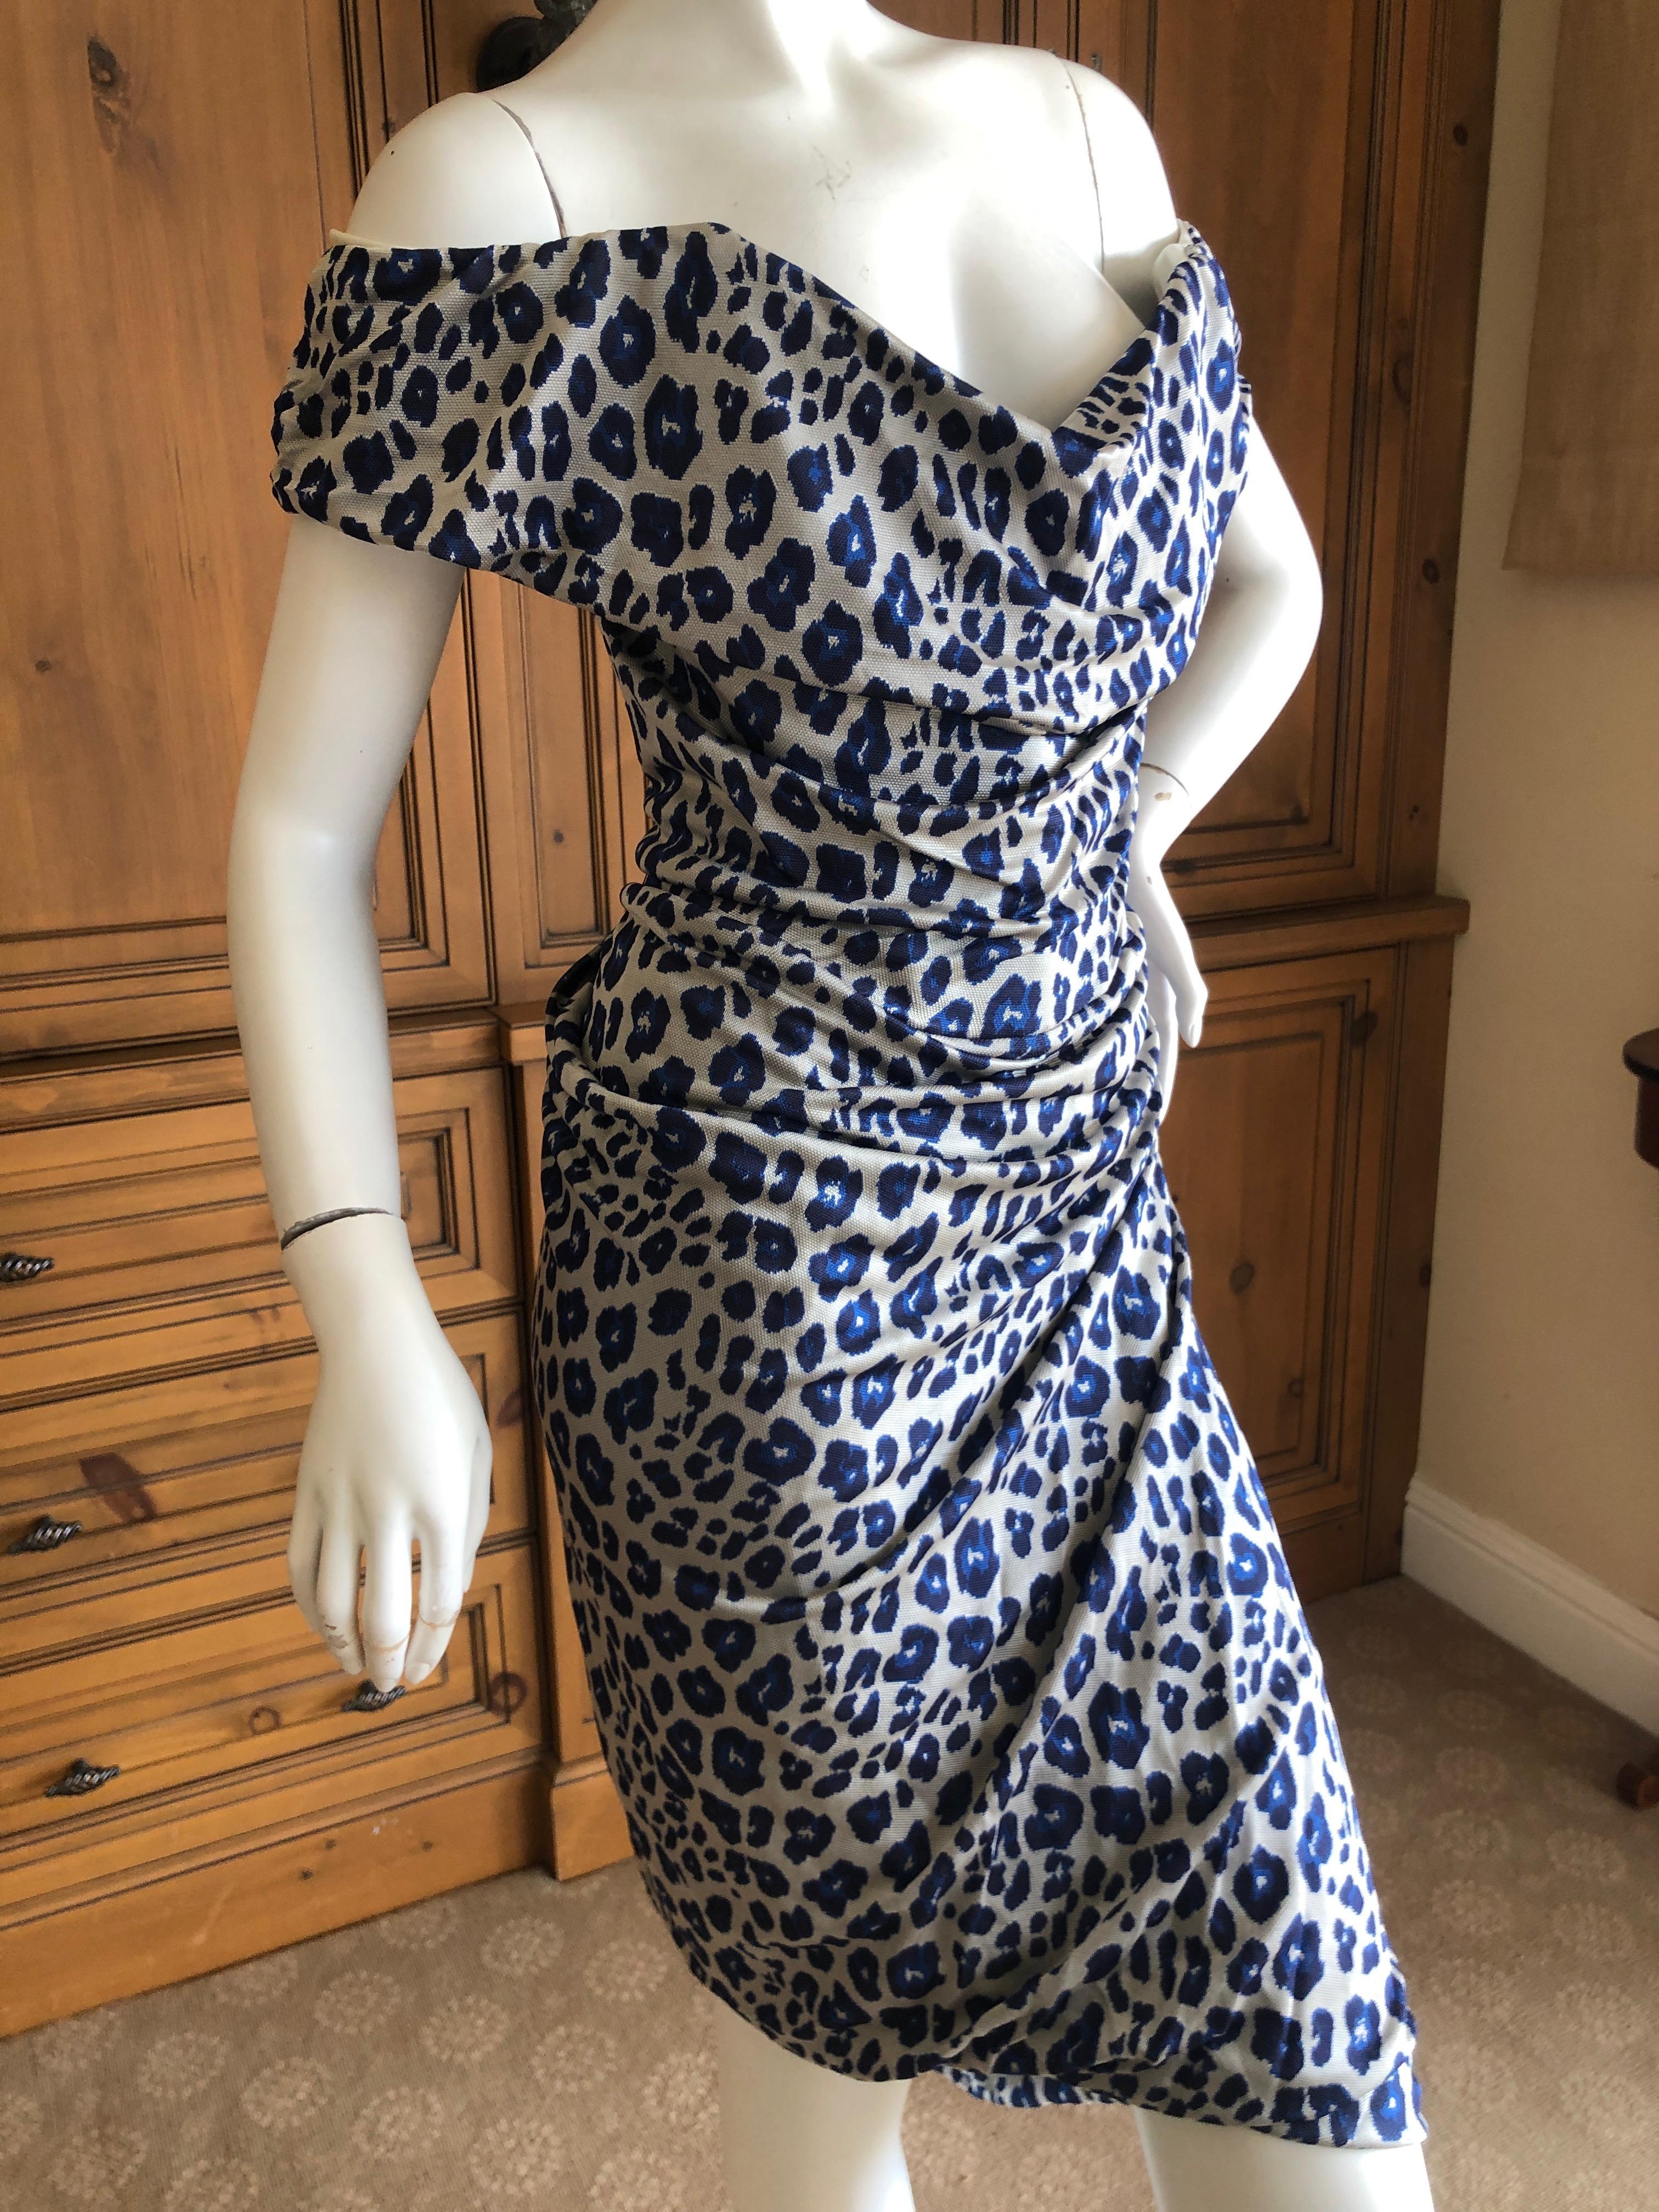 Super sexy draped leopard print dress from Vivienne Westwood Red Label.
There is a full inner corset, see photo's .
There is a lot of stretch in this fabric.
Size M
Bust 36